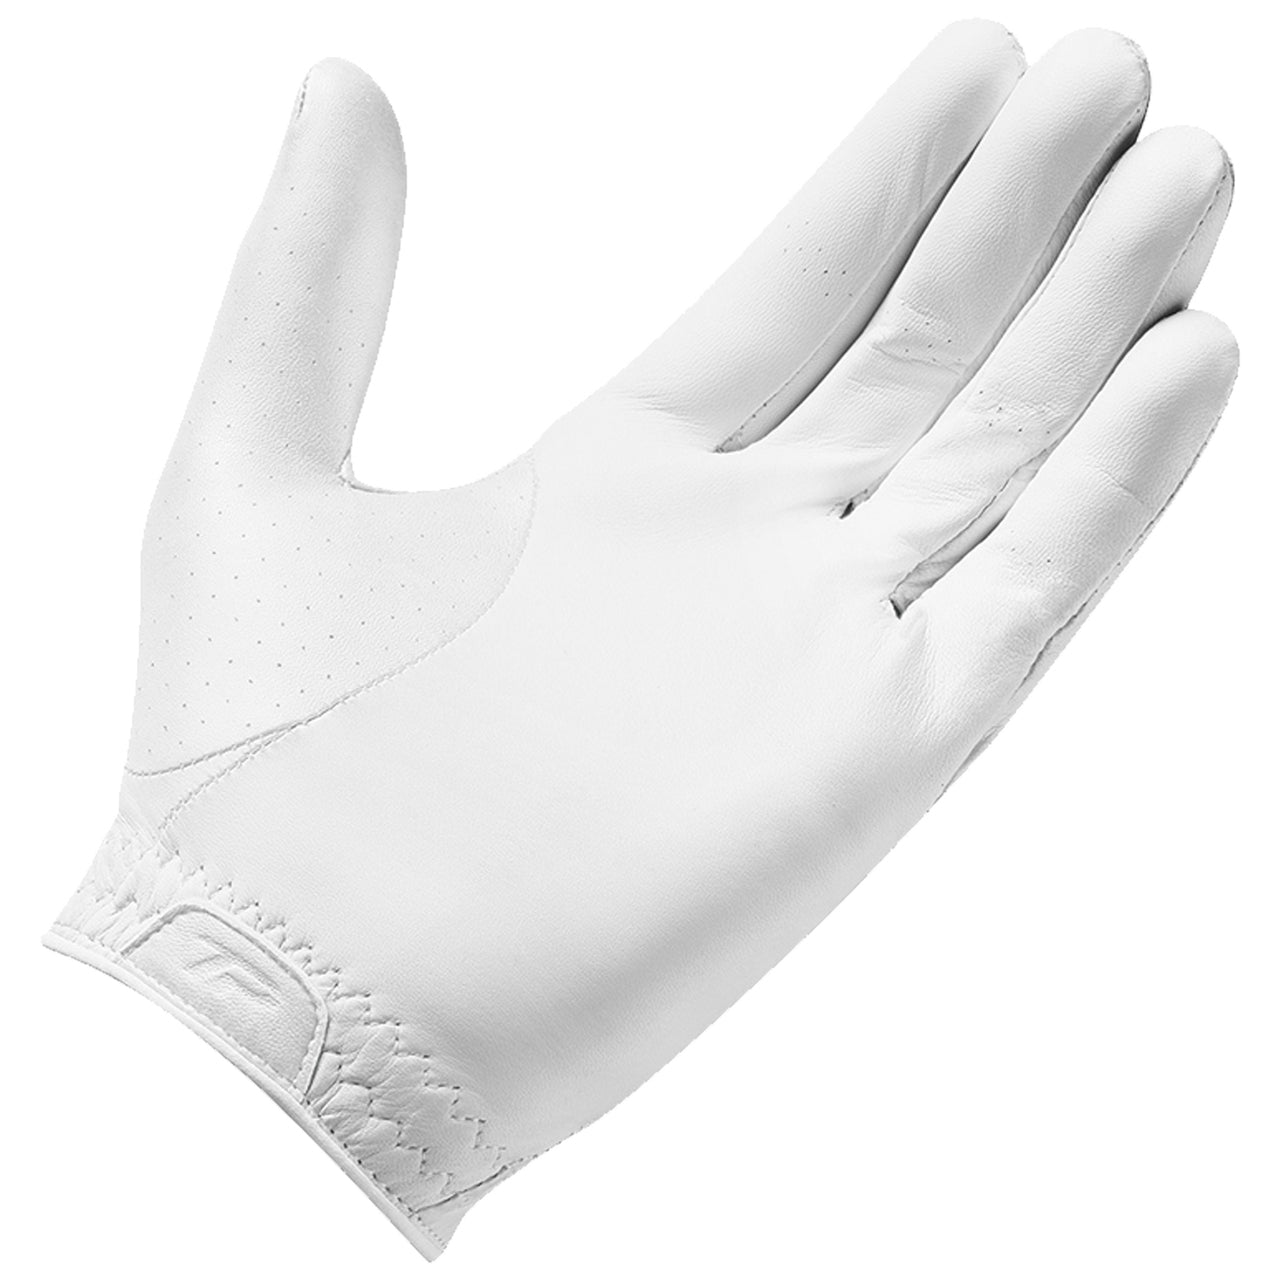 TaylorMade Mens Left Hand Tour Preferred Golf Glove